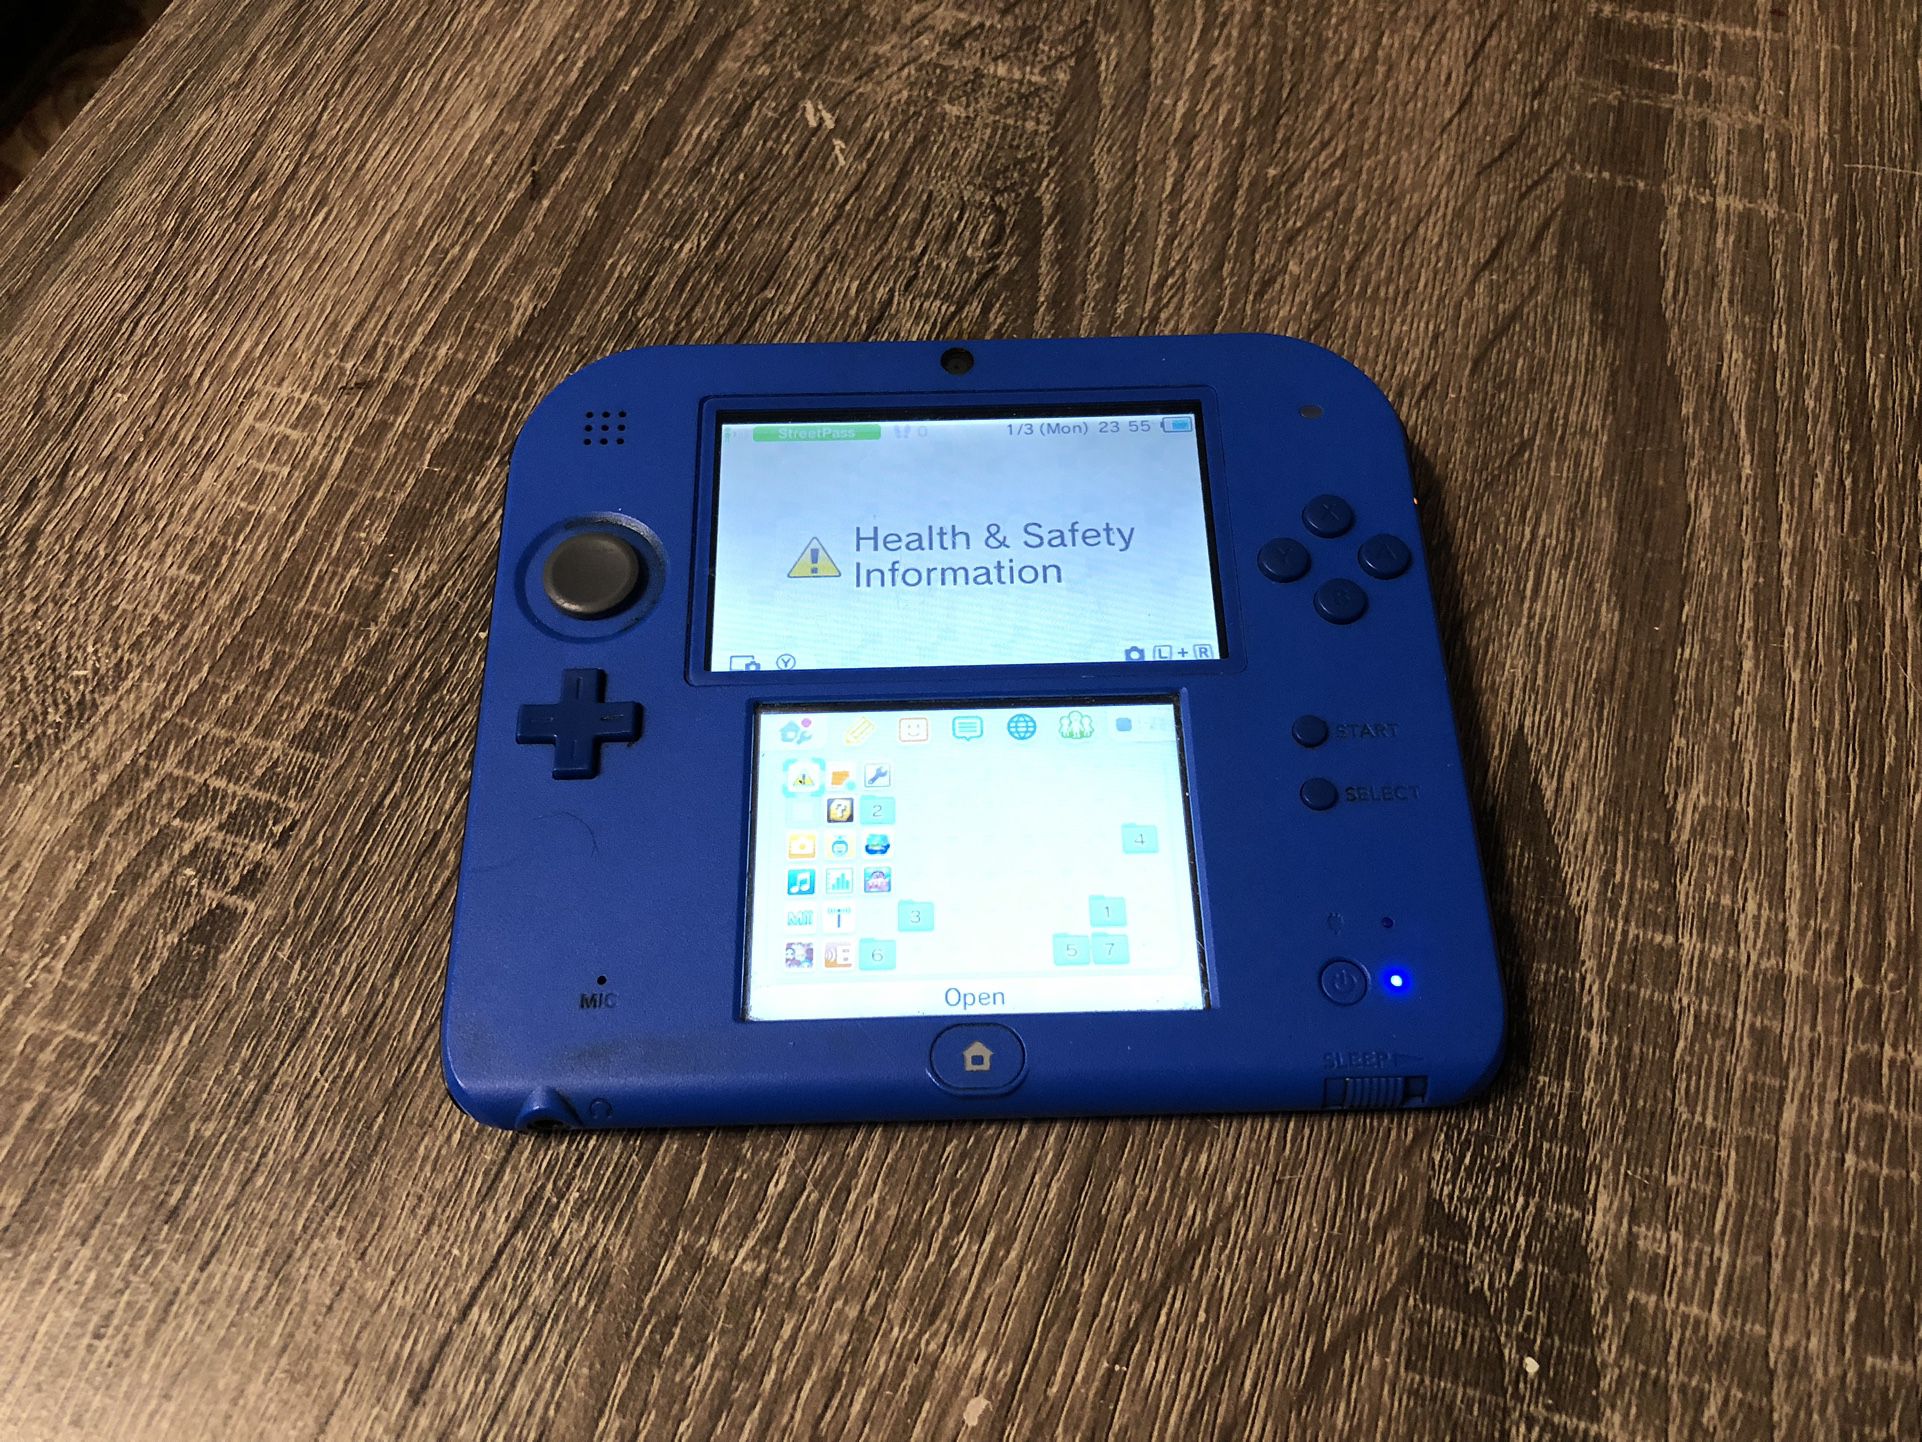 Nintendo 2ds-with 4 Games